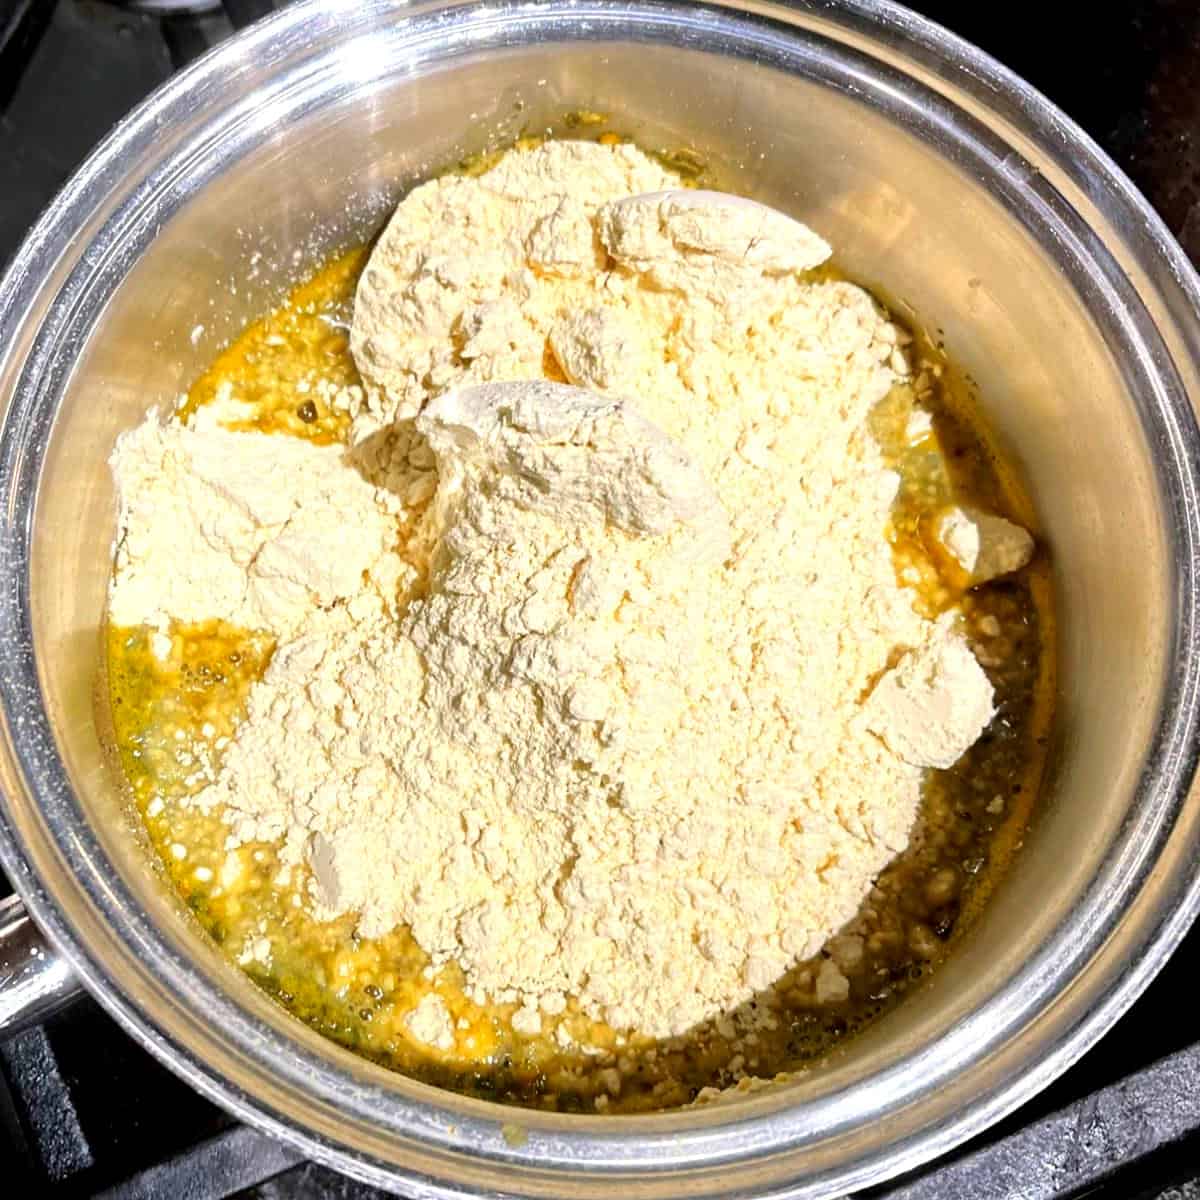 Besan or chickpea flour added to saucepan with water and seasonings.